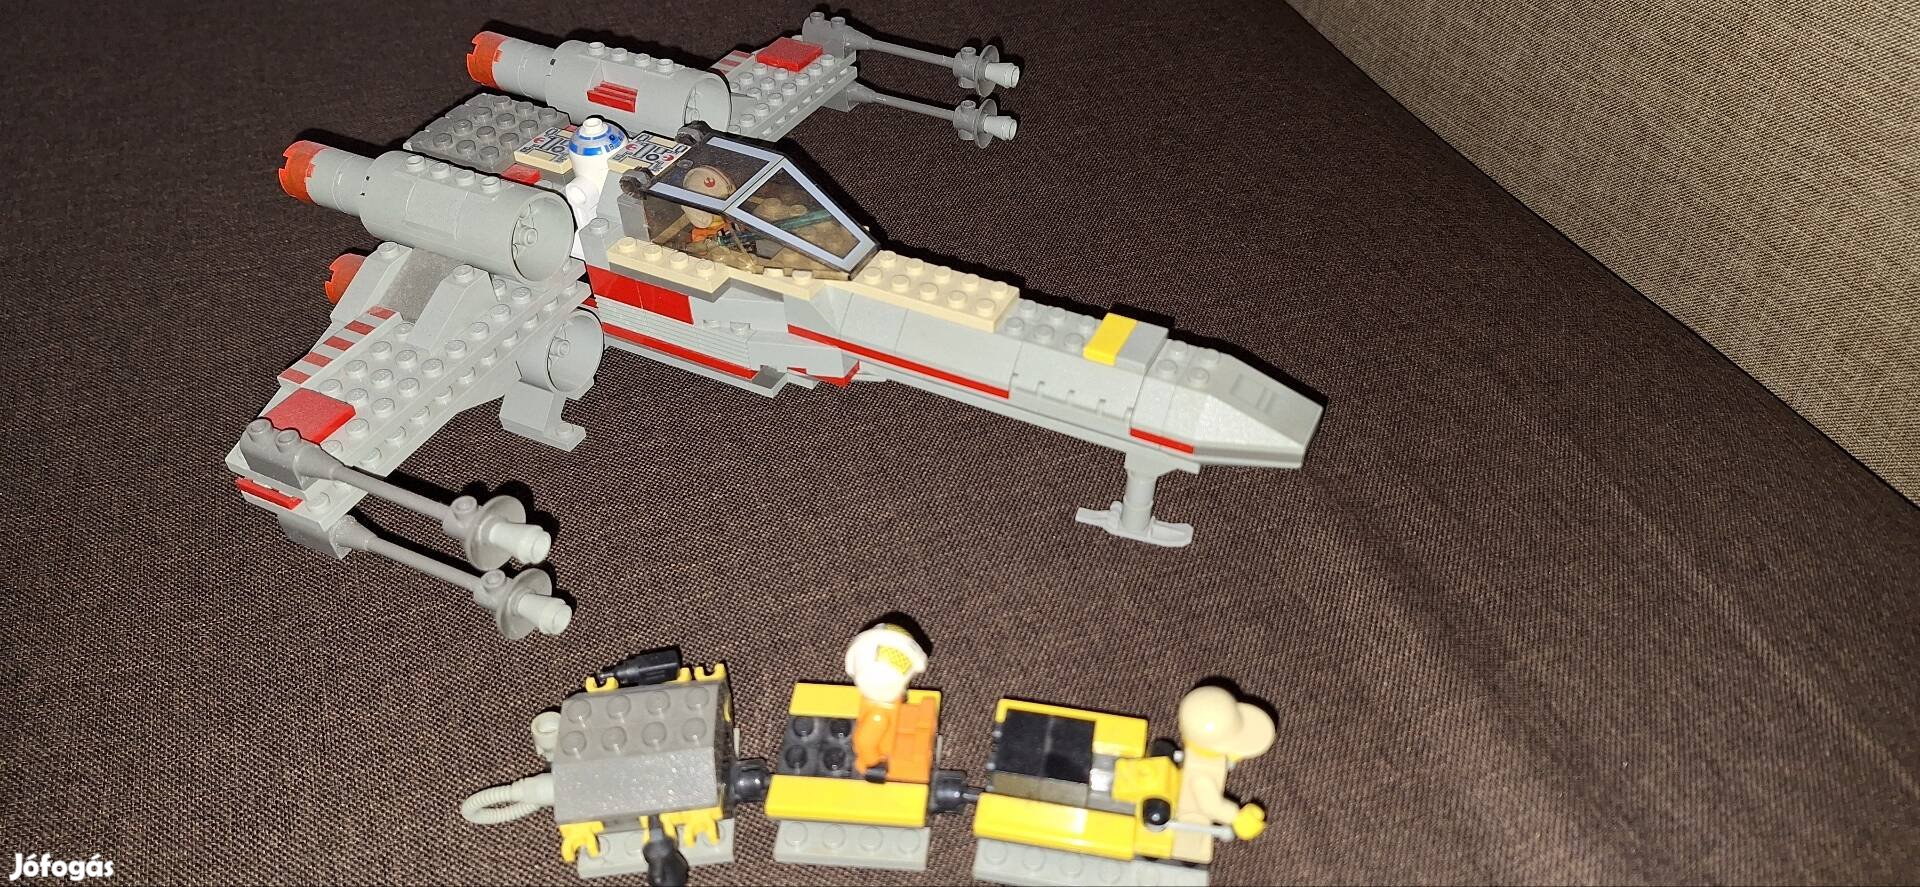 LEGO Star Wars 7140: X-wing Fighter Set